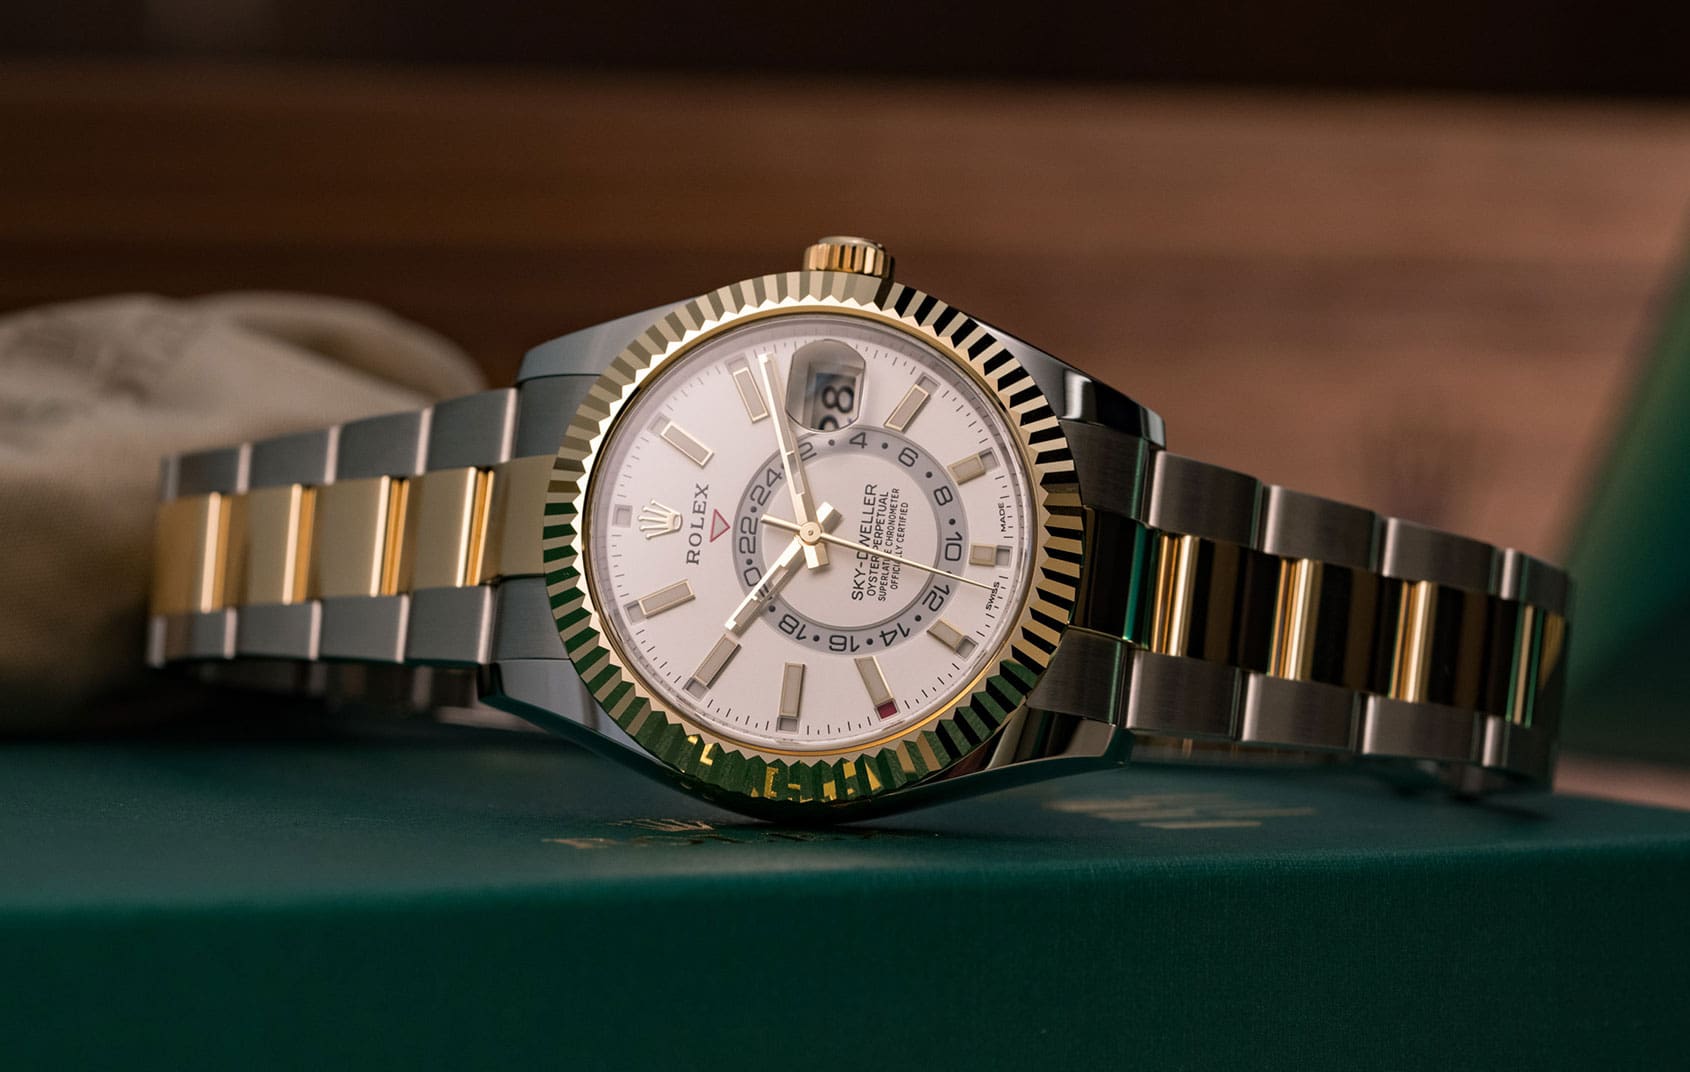 VIDEO: 4 things you need to know about the new Rolex Sky-Dweller